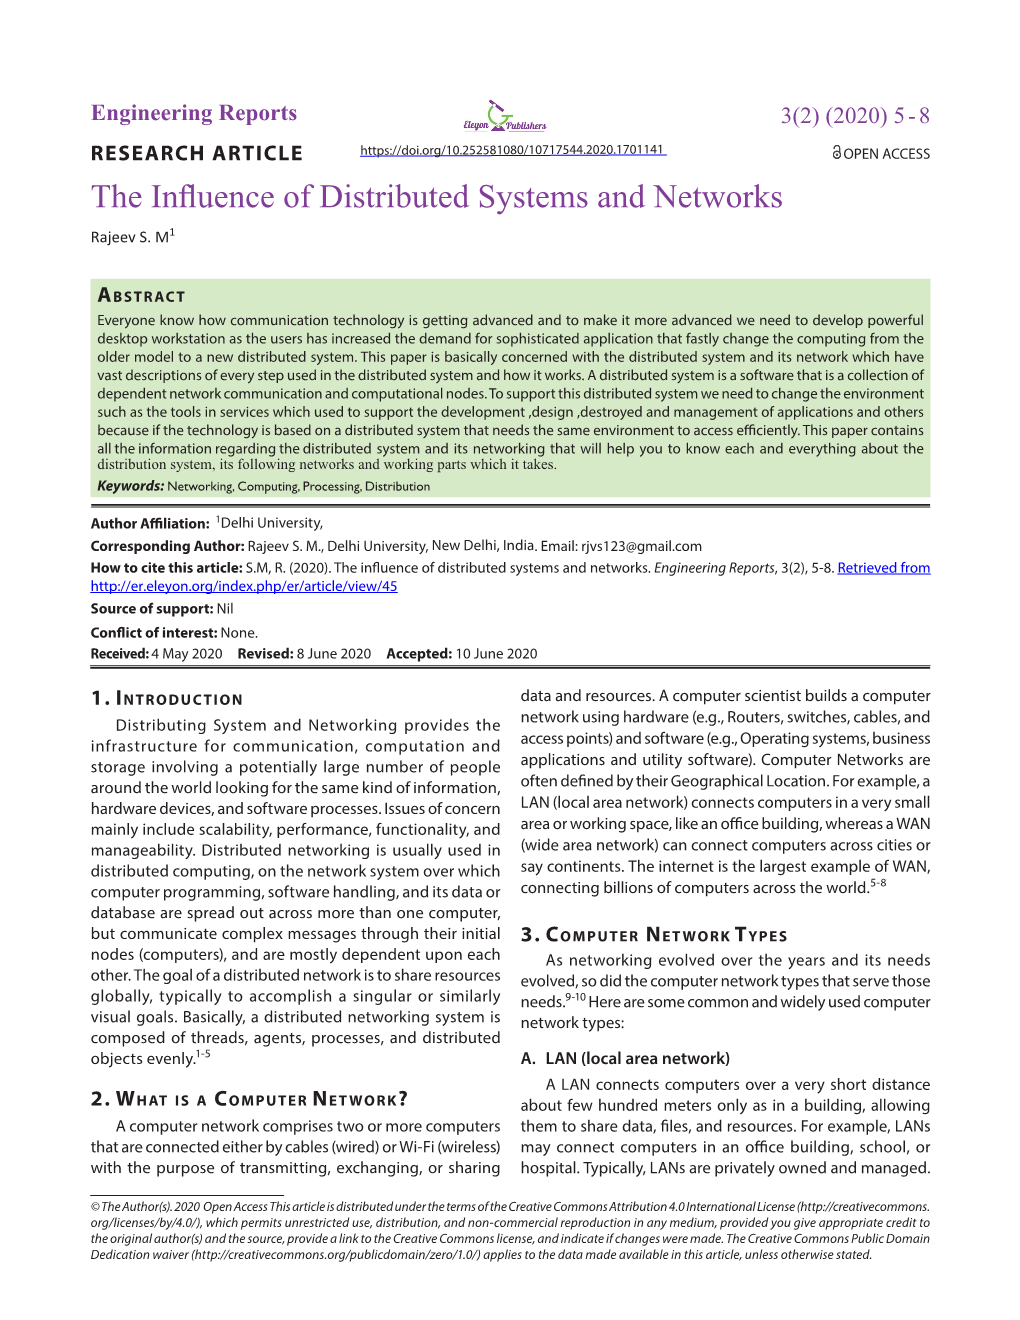 The Influence of Distributed Systems and Networks Rajeev S